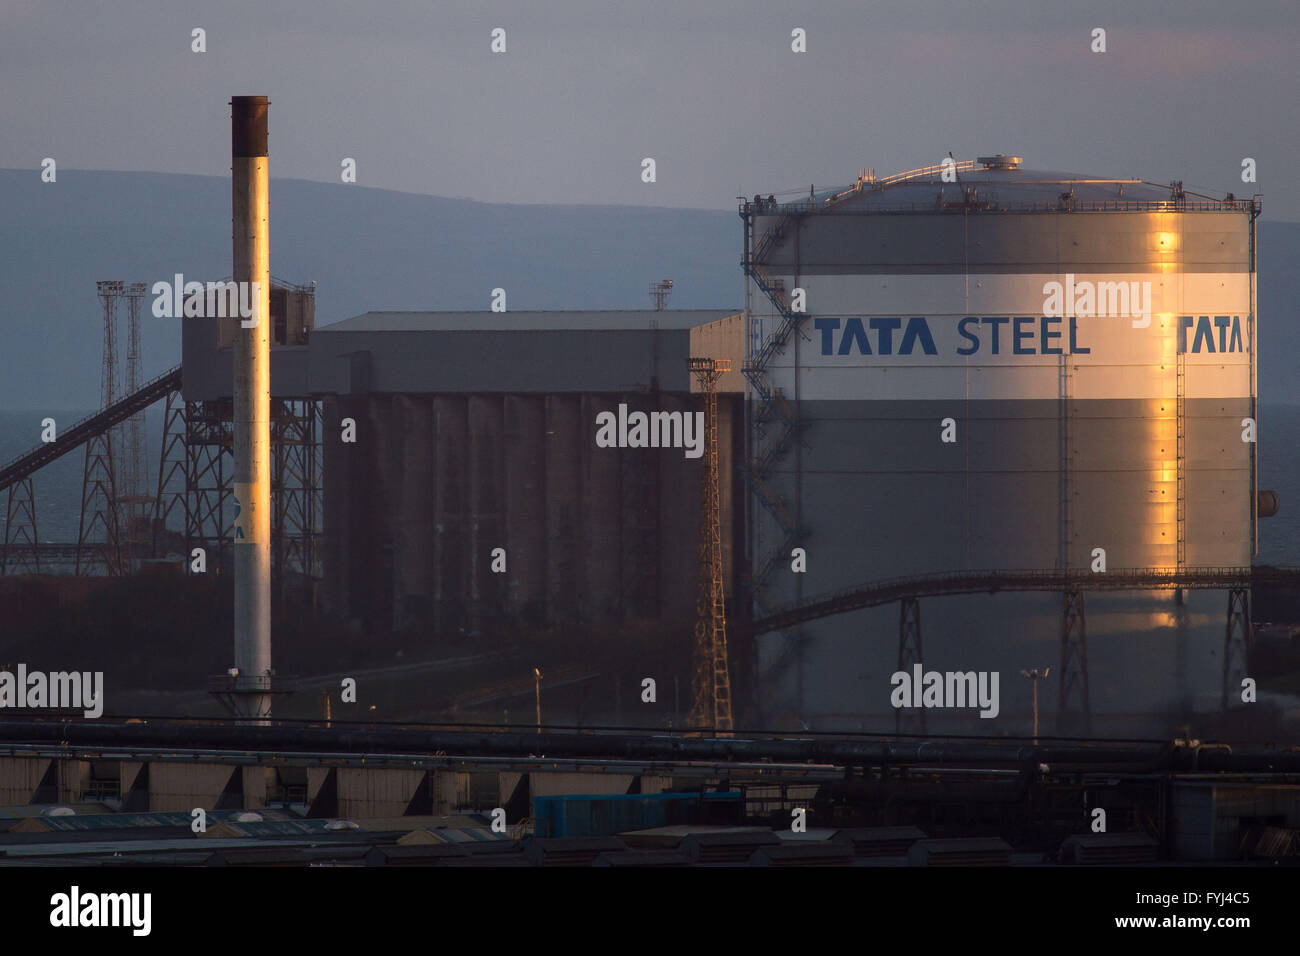 Tata Steel steel works in Port Talbot, south Wales. The steel works is being put up for sale putting hundres of UK jobs at risk. Stock Photo